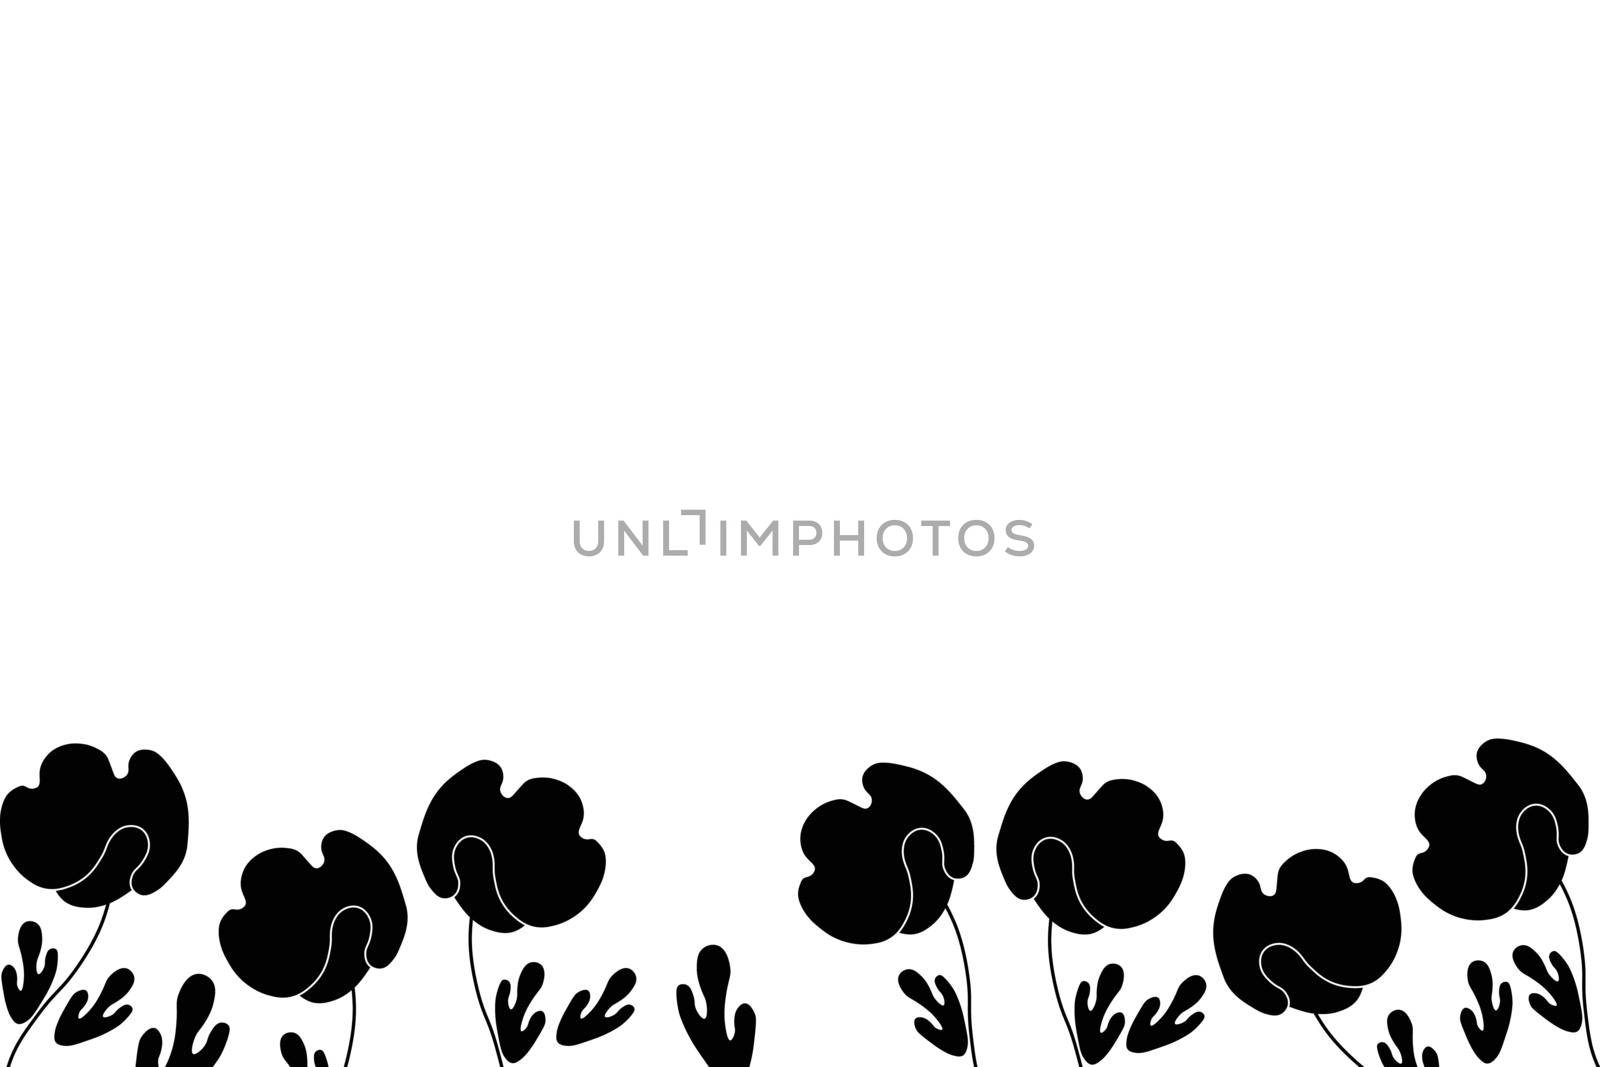 Floral frame based on traditional folk art ornaments. Black and white background. Ornate border with flowers. Vector illustration for wallpaper, posters, card. Scandinavian style. Copy space.